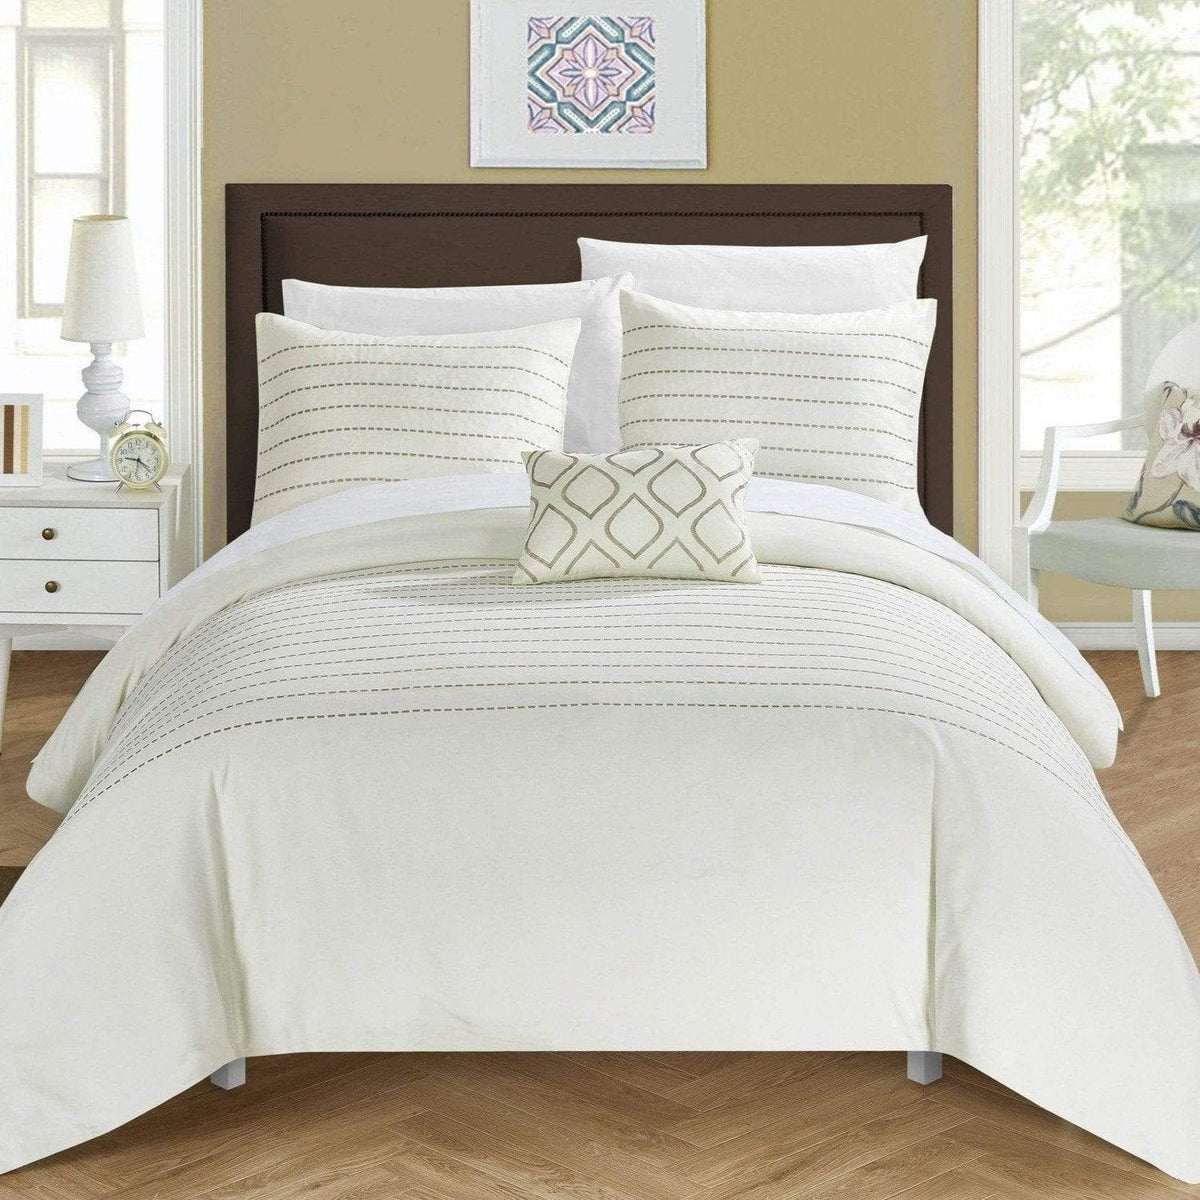 Chic Home Bea 4 Piece Embroidered Duvet Cover Set Beige